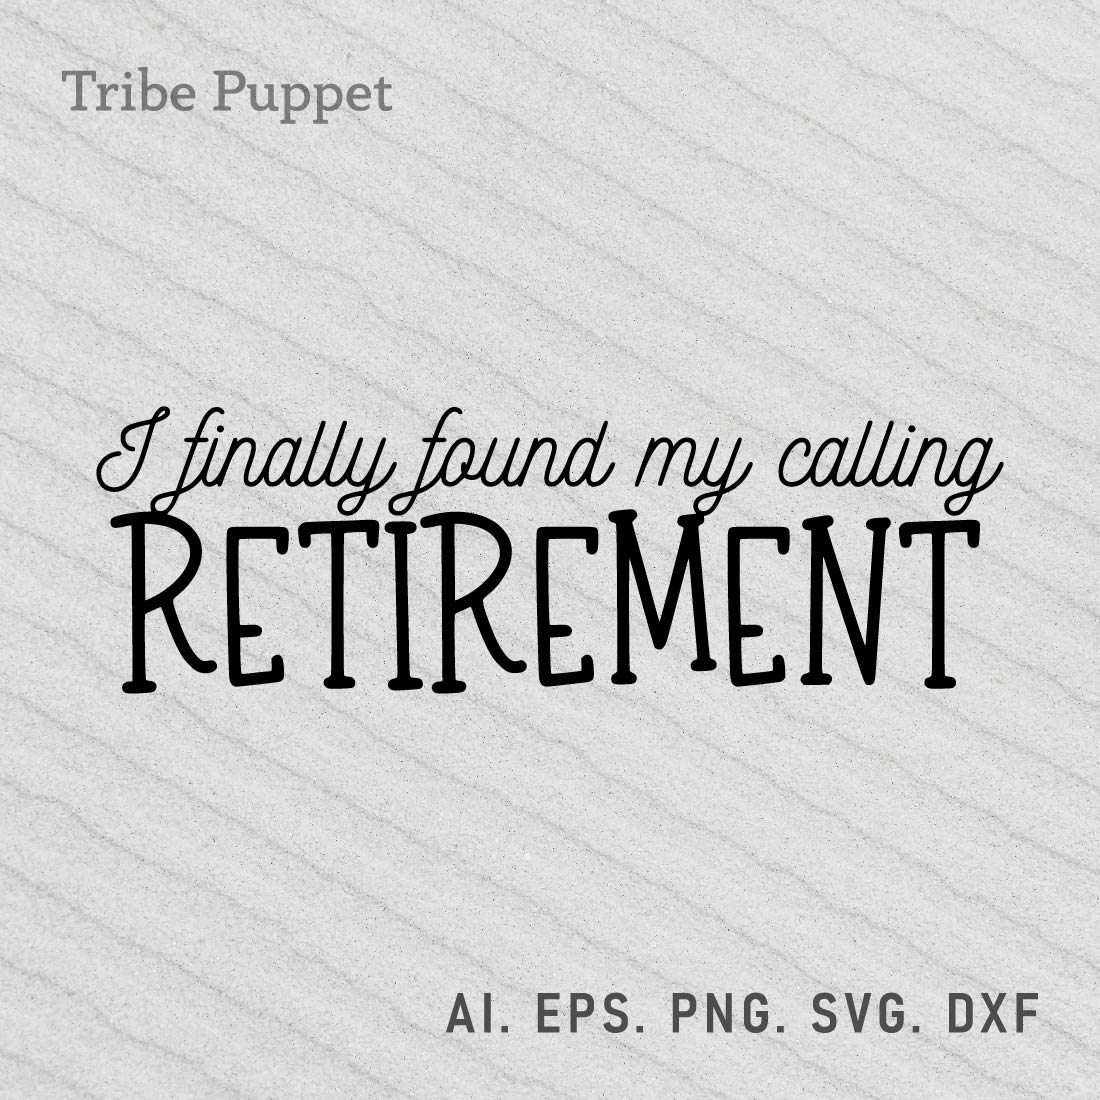 Retirement Quotes preview image.